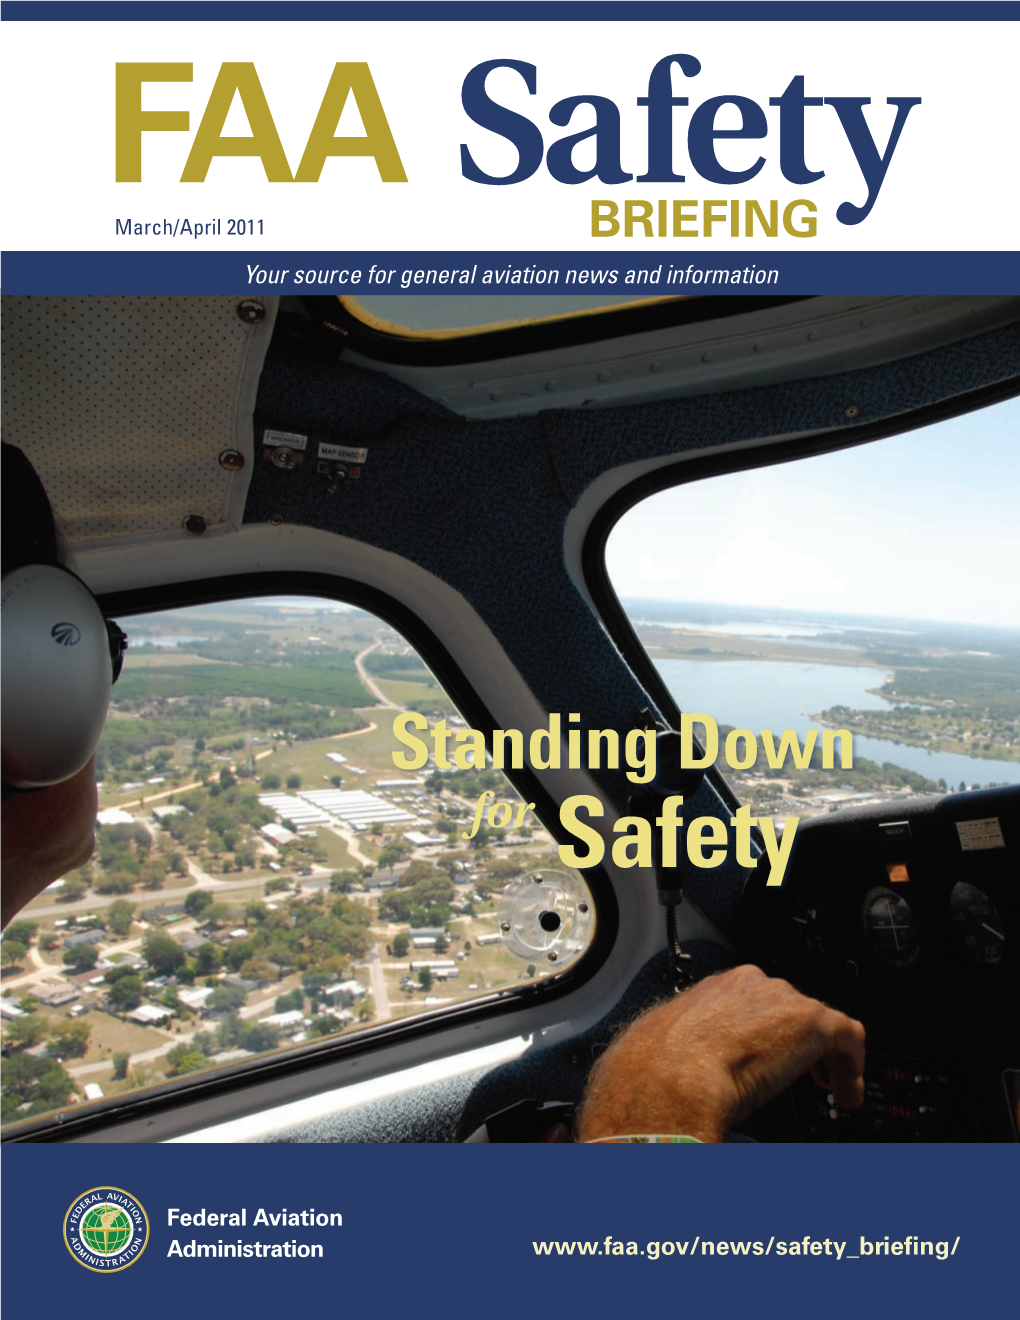 FAA Safety Briefing: March/April 2011